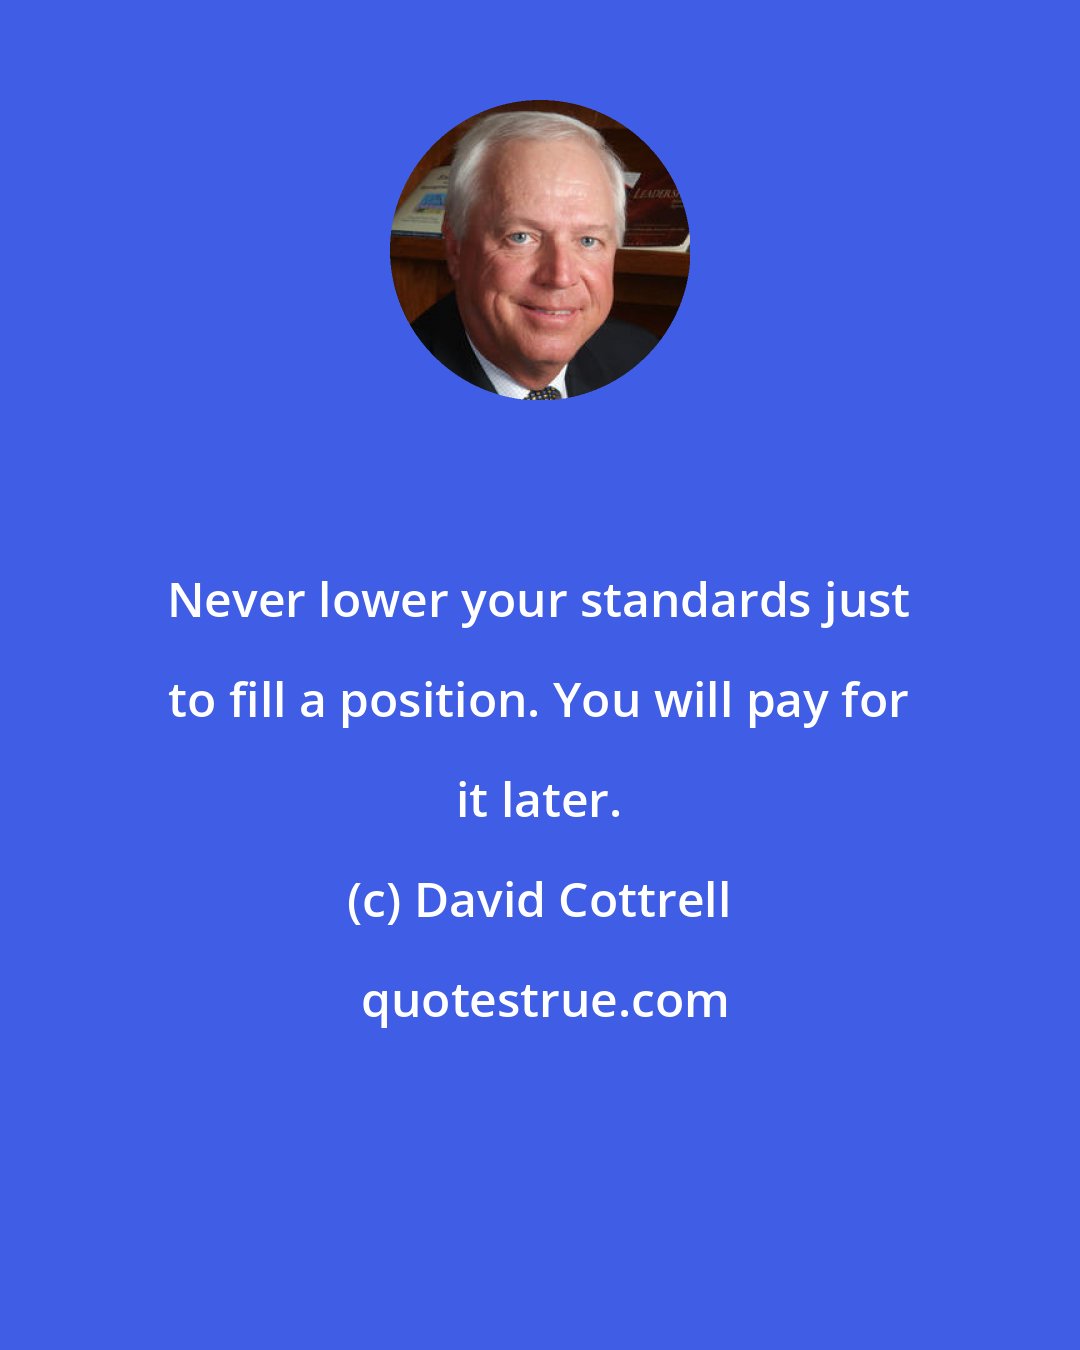 David Cottrell: Never lower your standards just to fill a position. You will pay for it later.